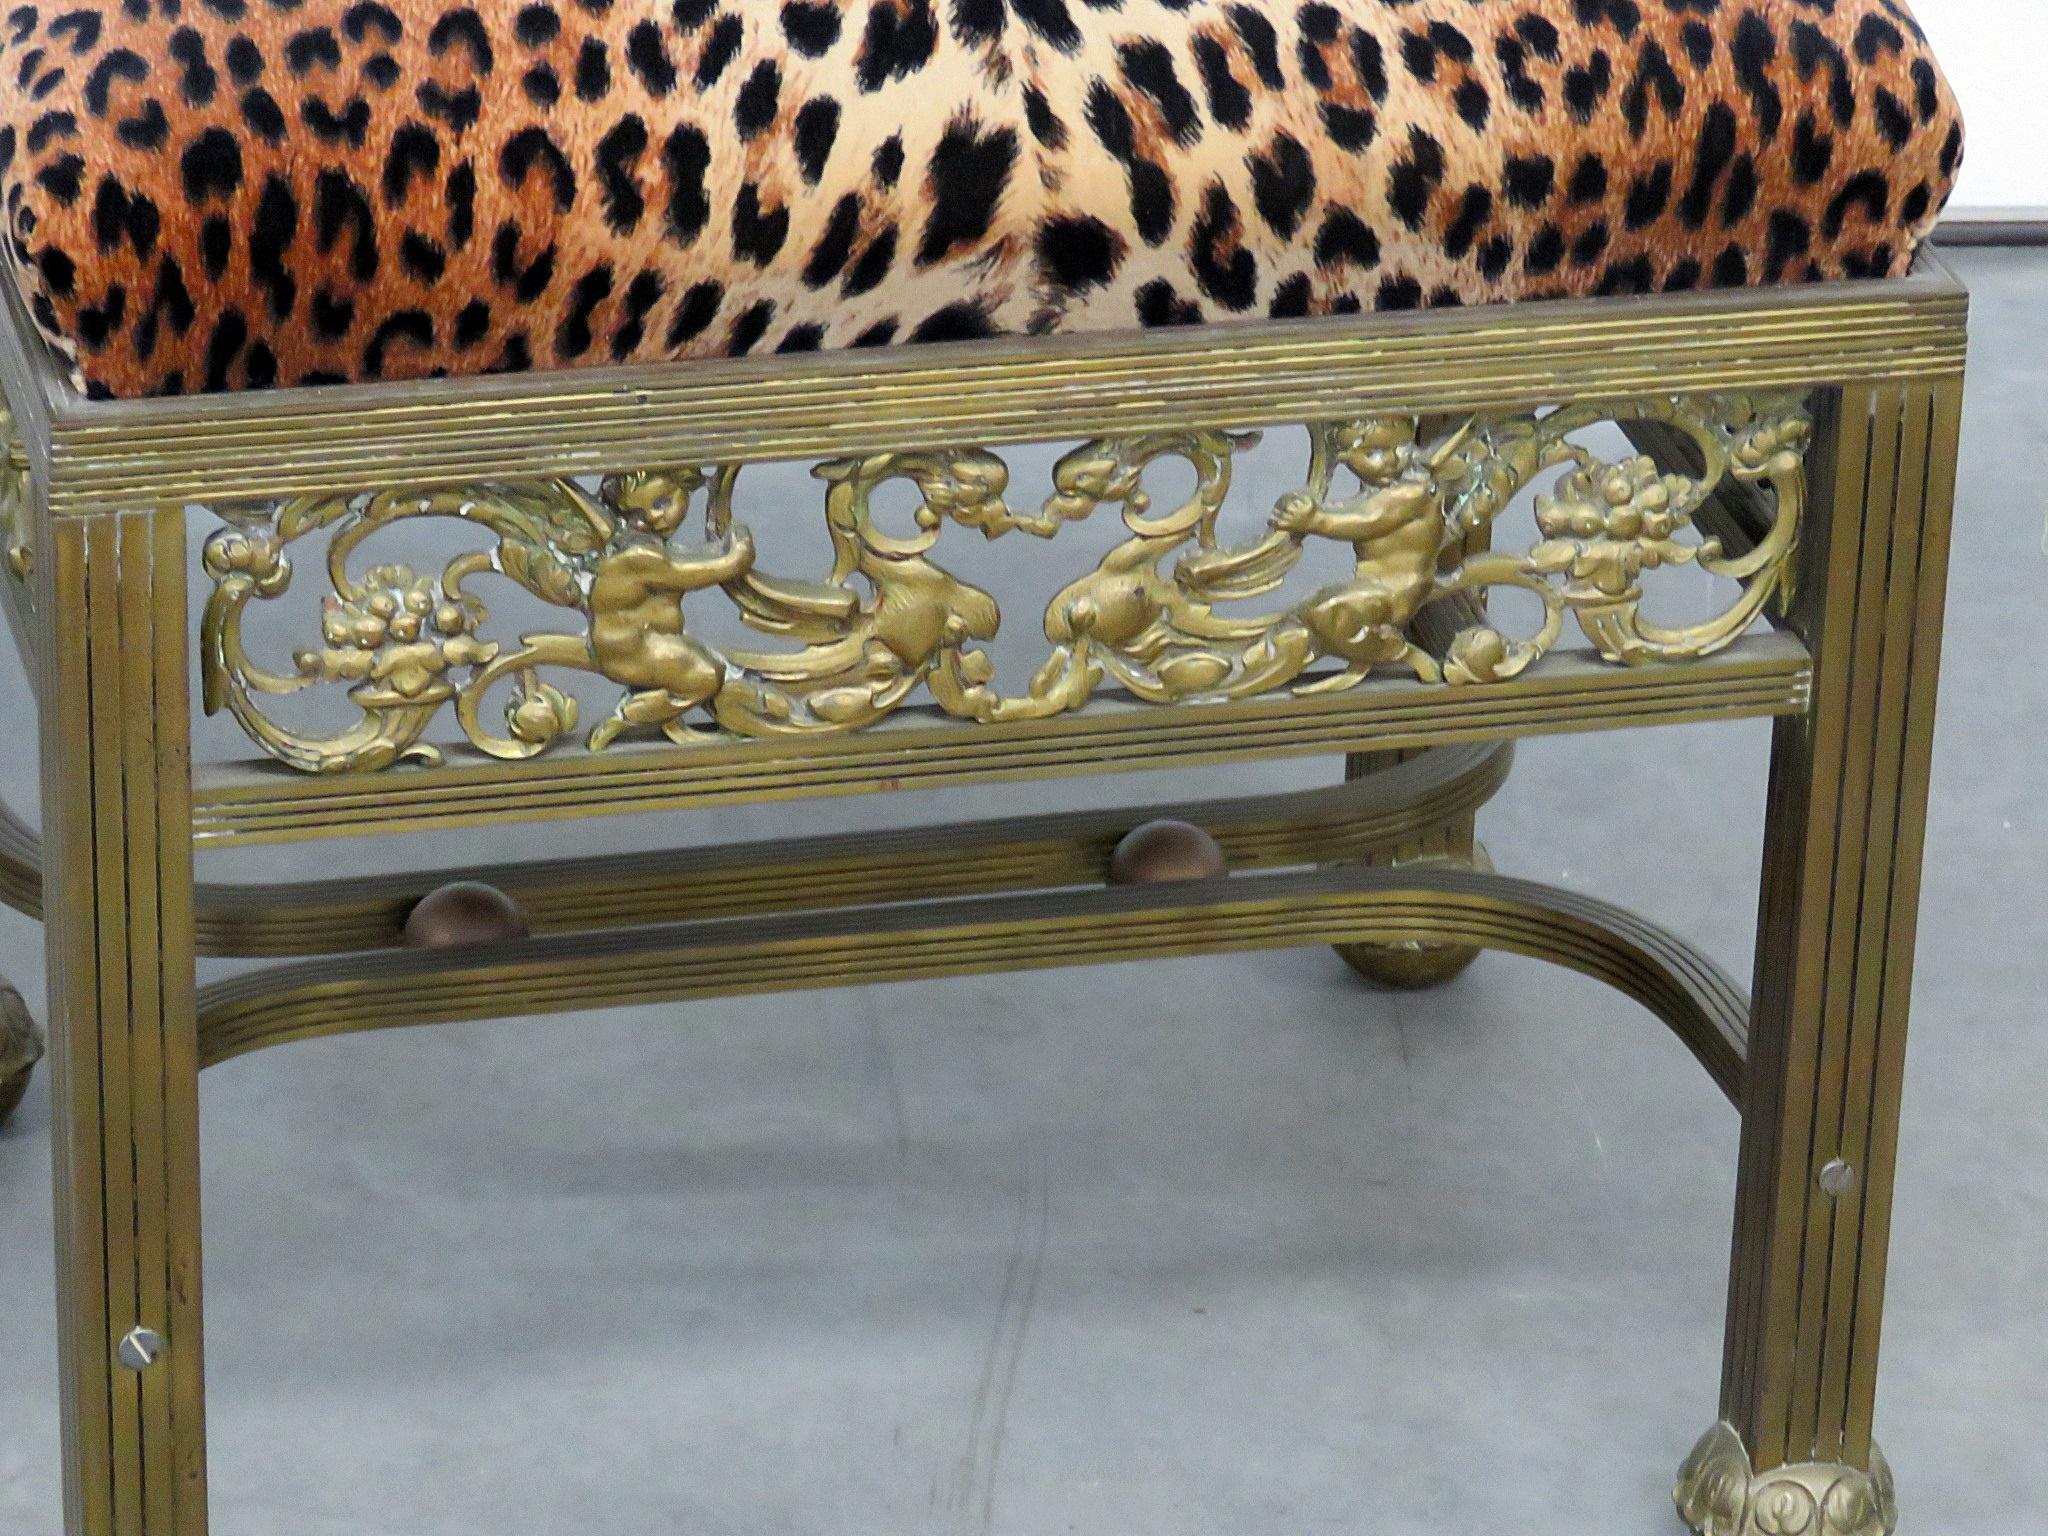 This is a gorgeous French Regency style brass foot stool with leopard print upholstery.